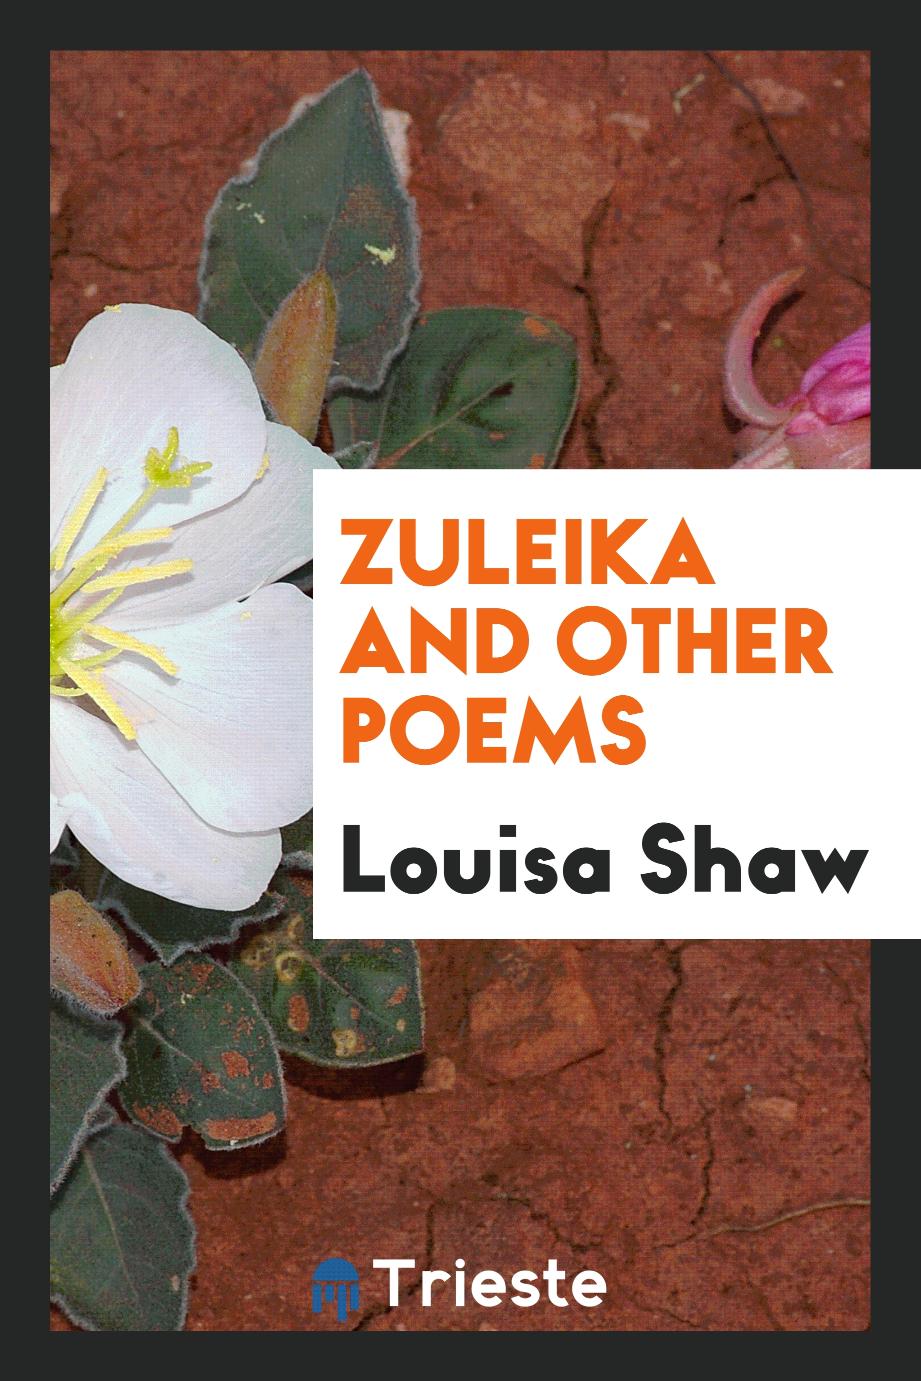 Zuleika and Other Poems